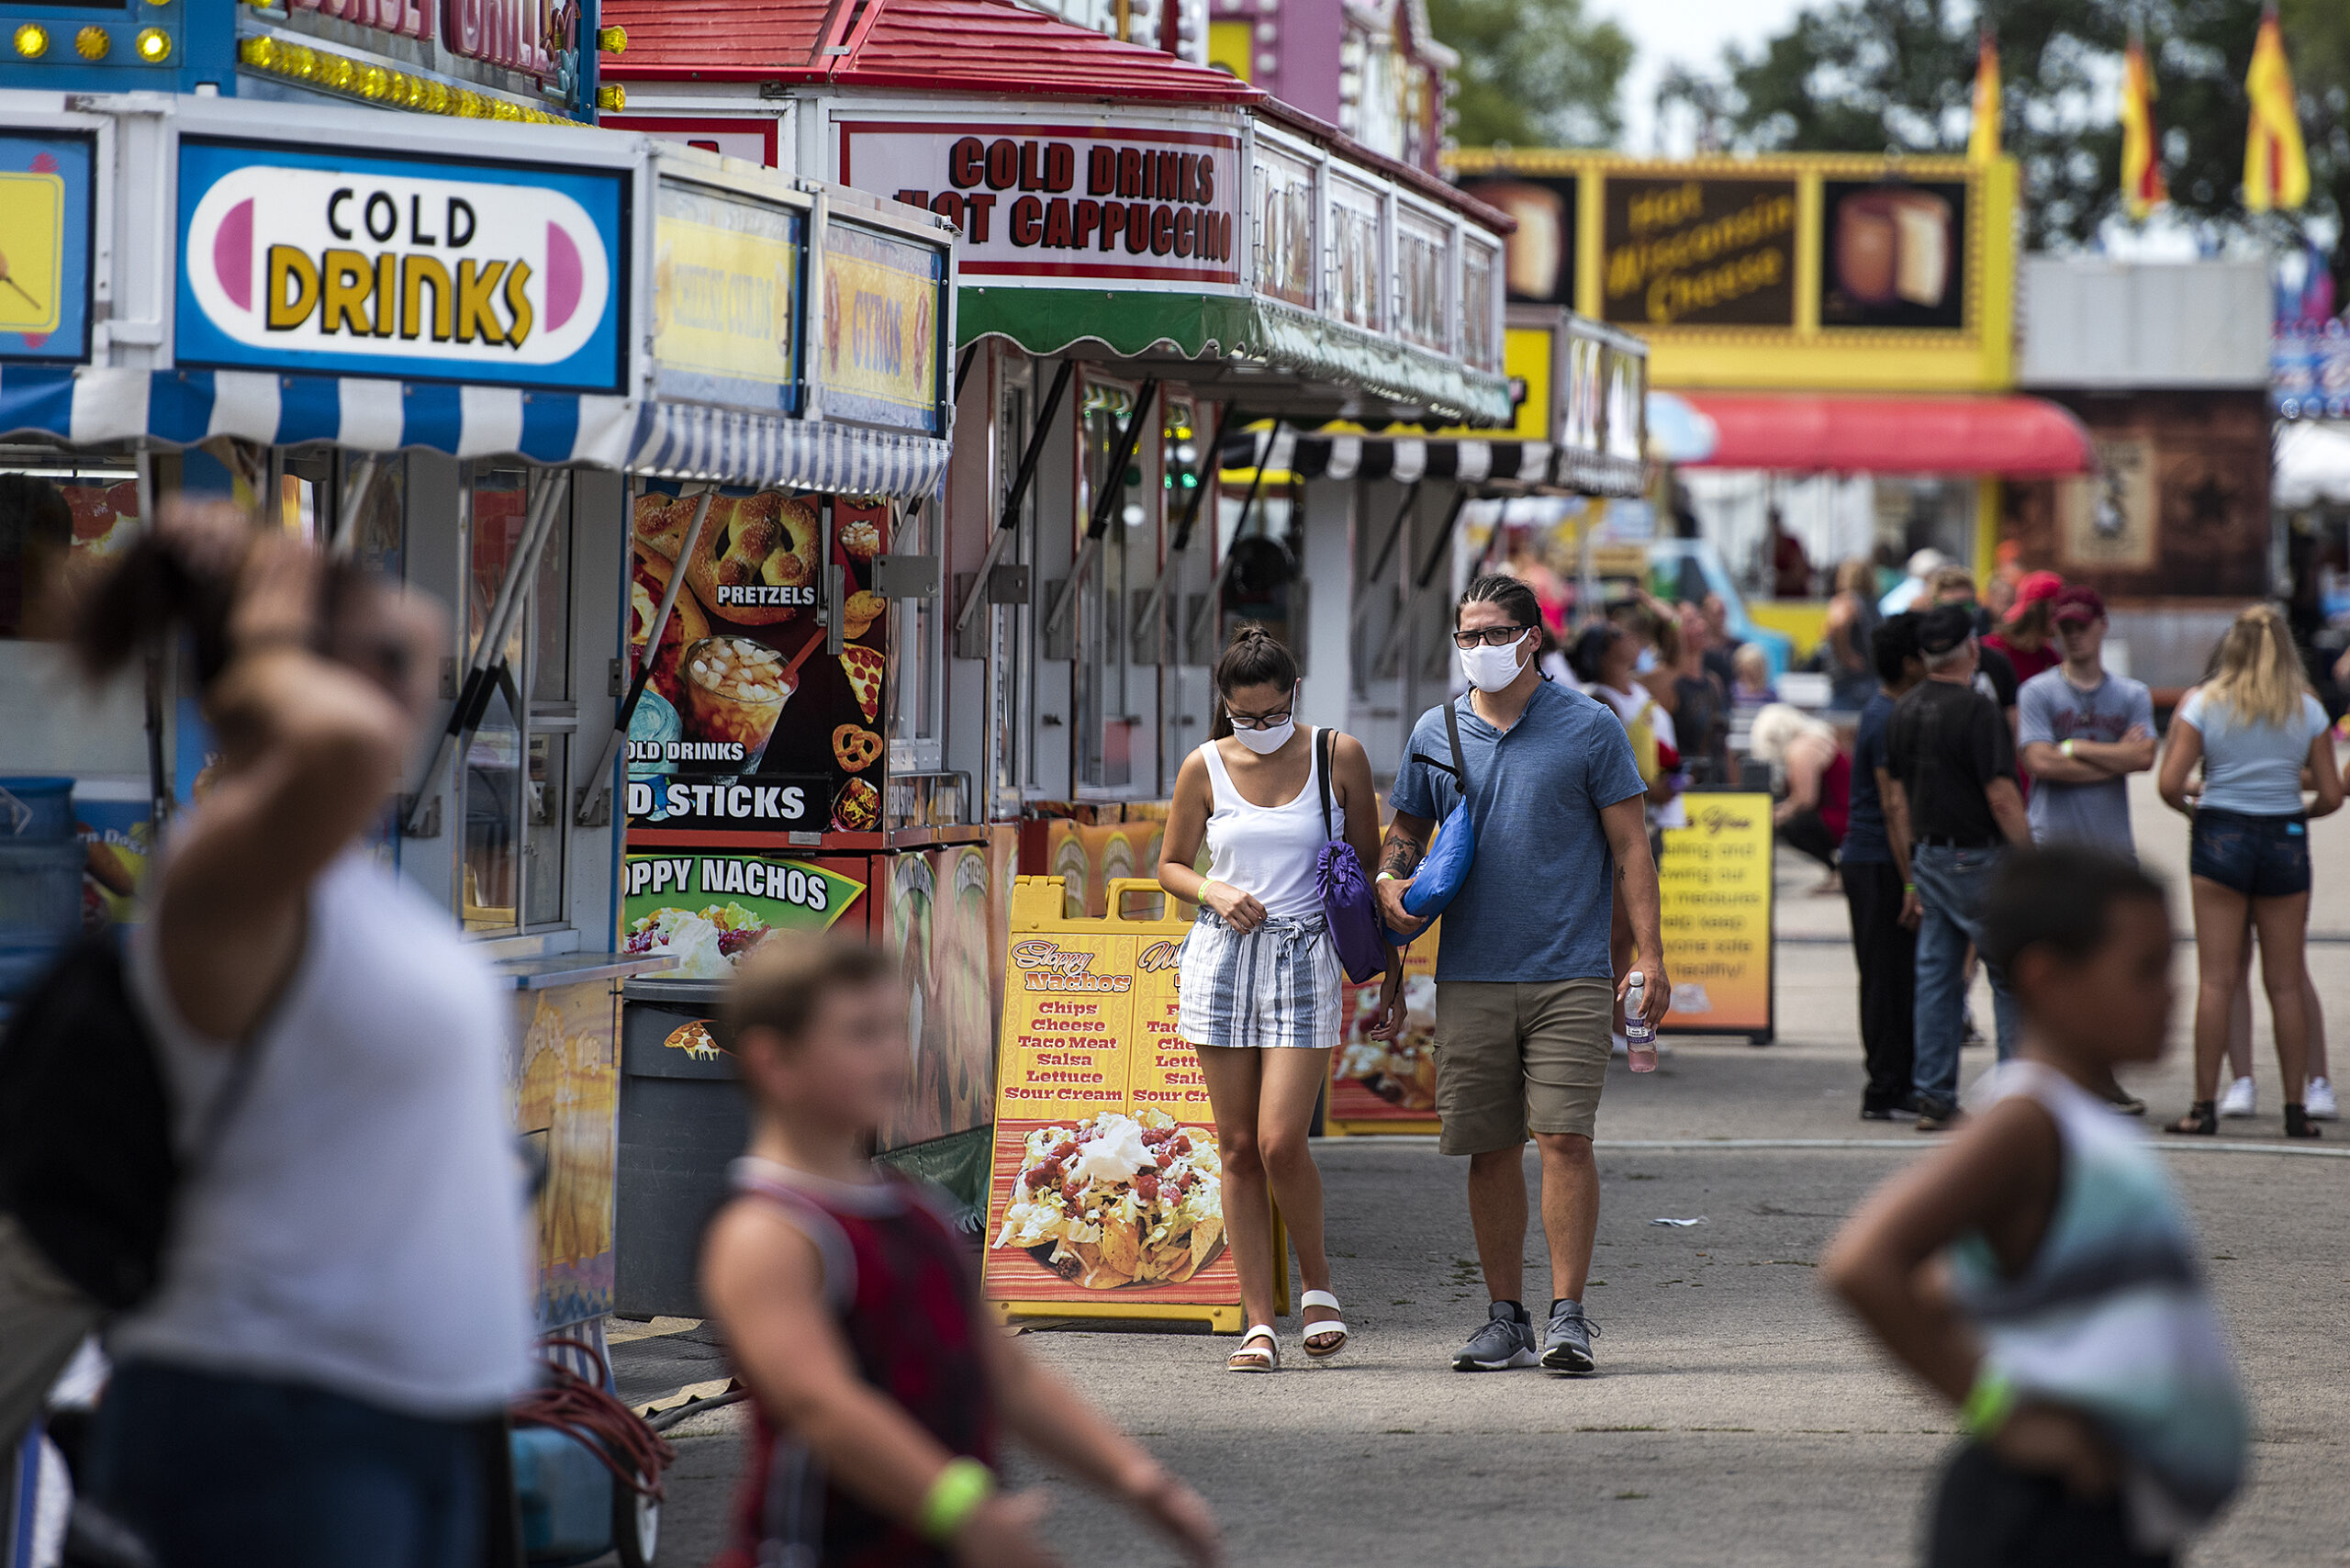 More Than 50 Wisconsin Fairs Have Been Canceled This Summer, But The Brown County Fair Is Underway